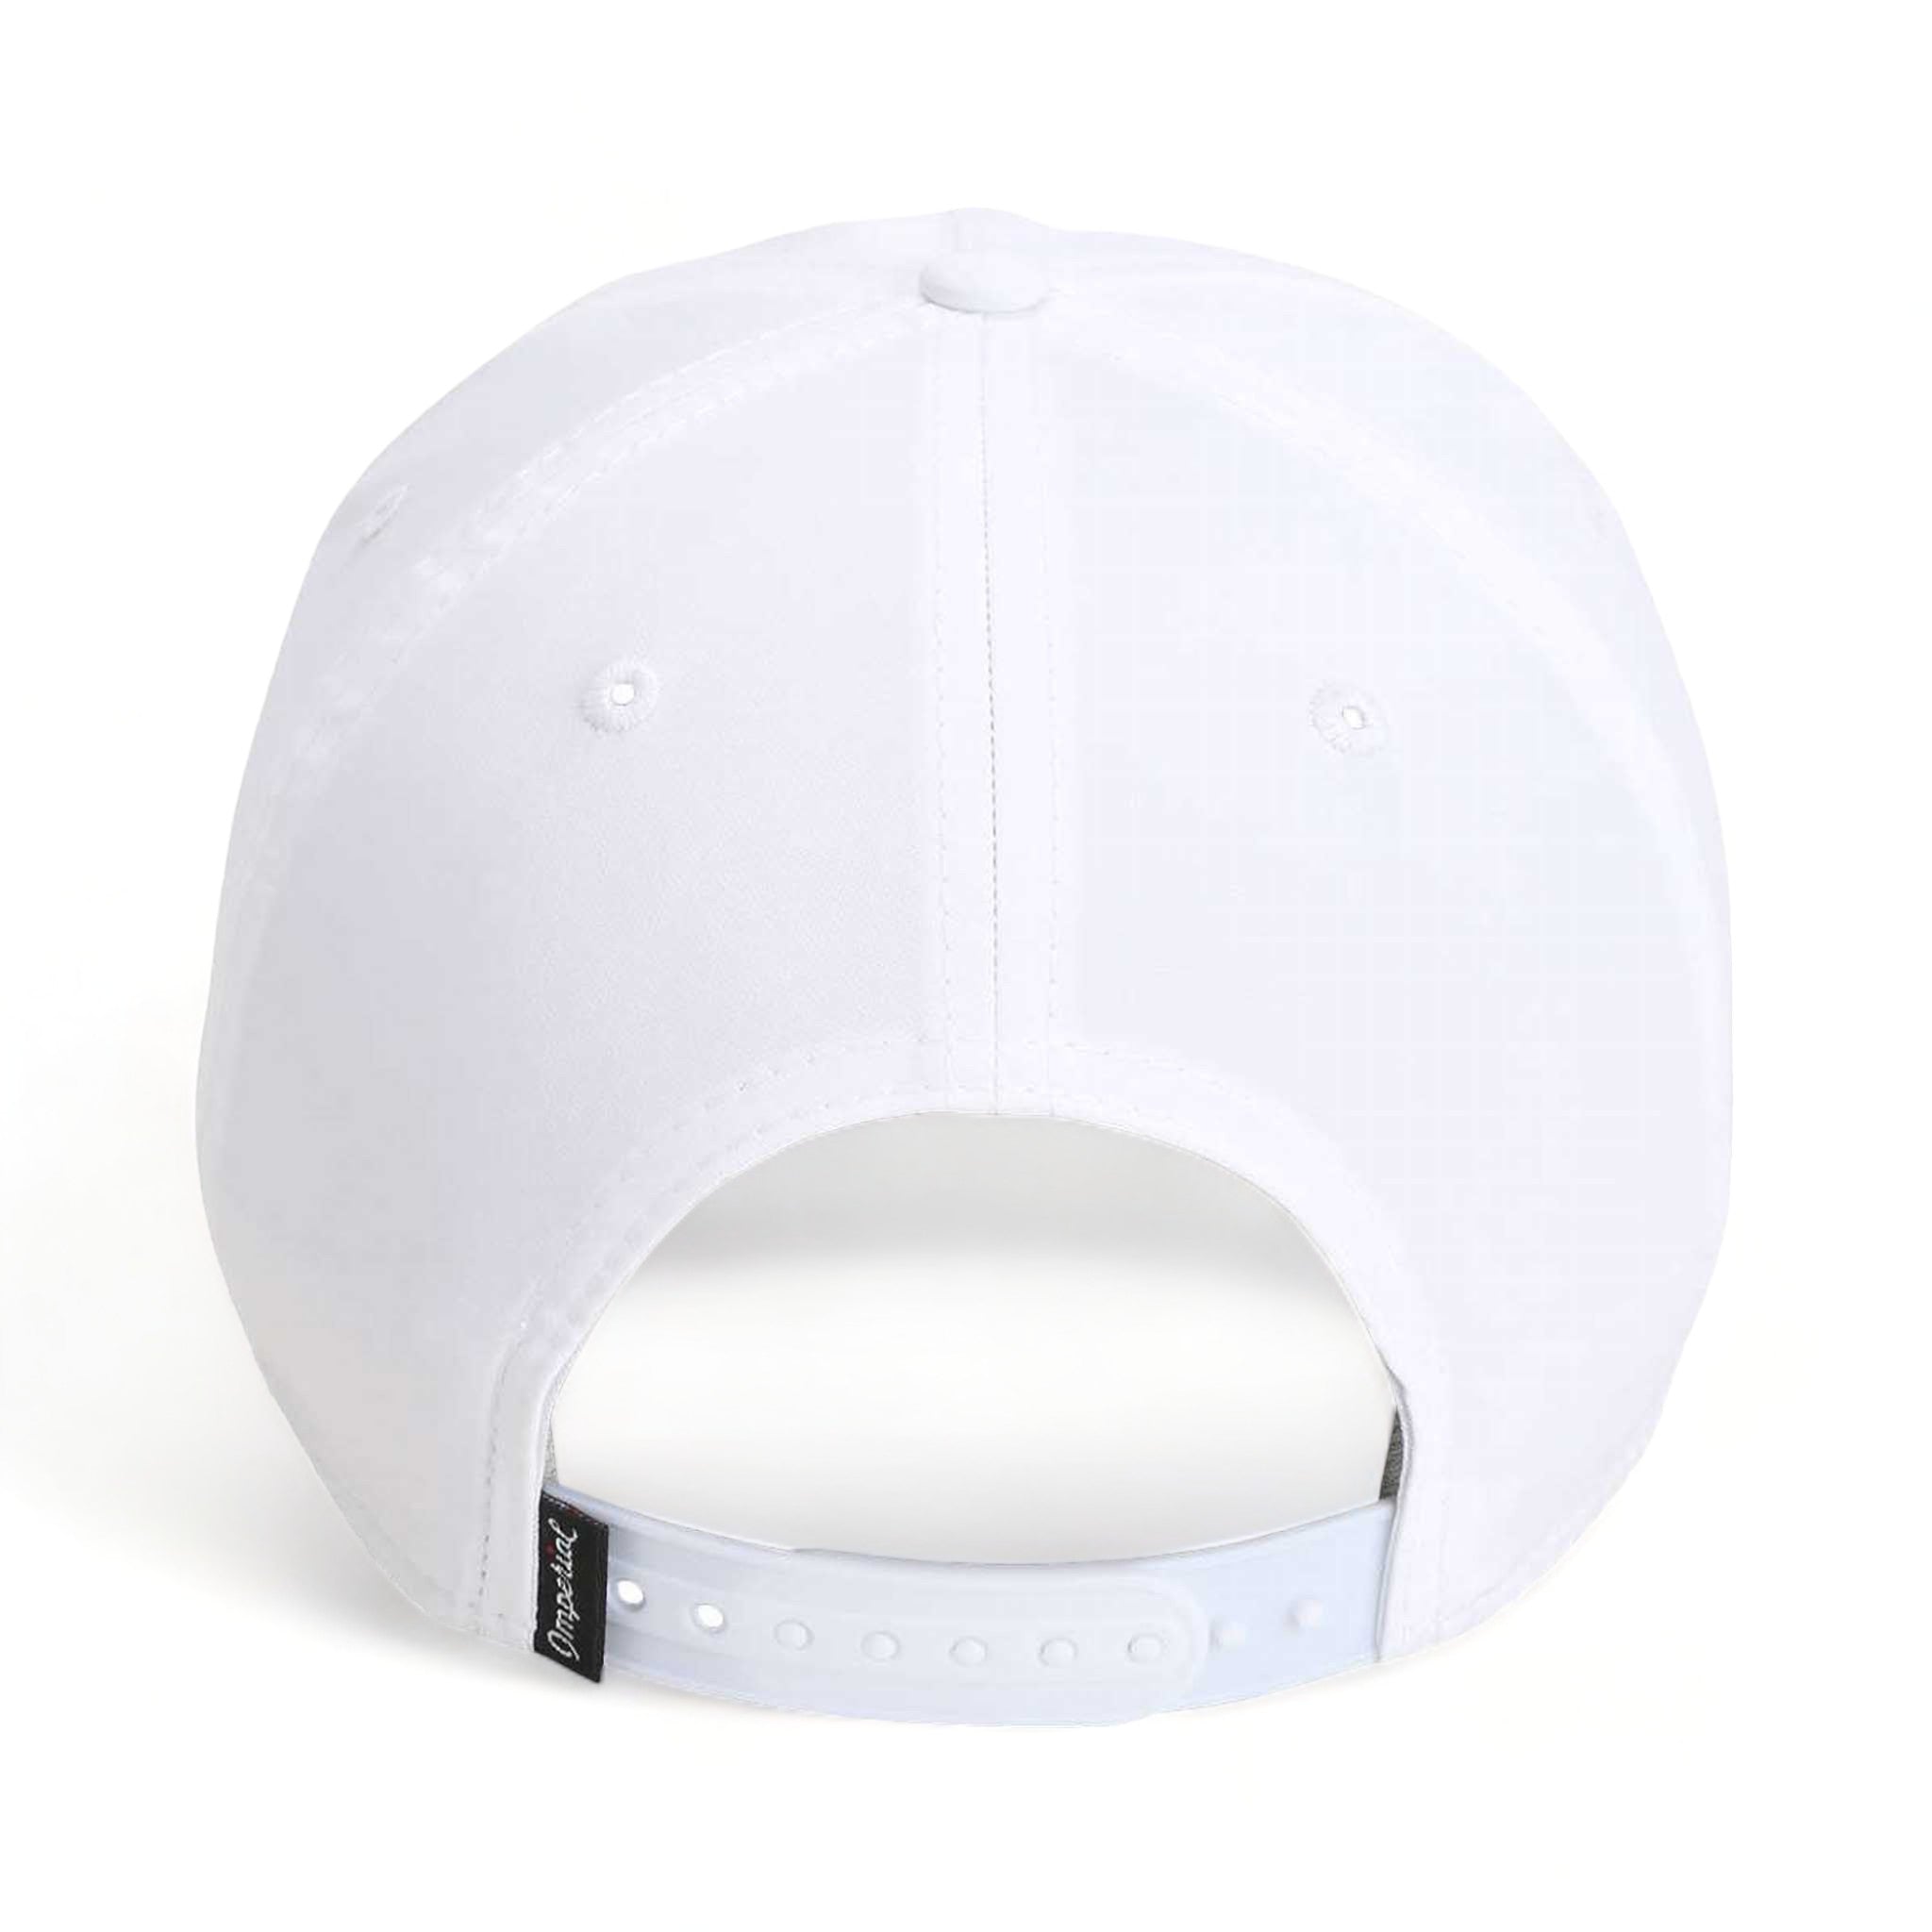 Back view of Imperial 5054 custom hat in white and black